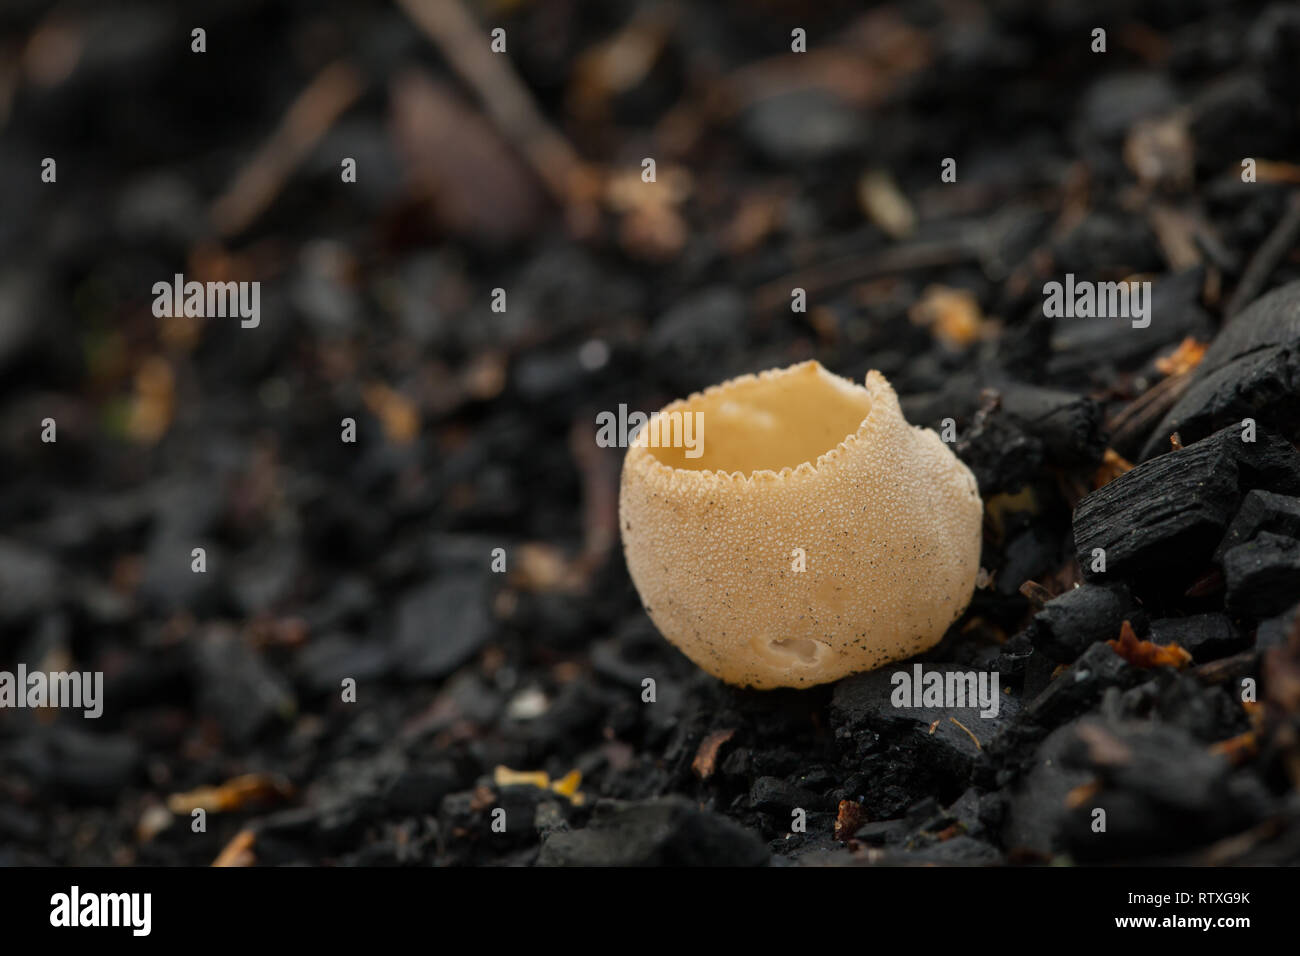 Toothed cup fungus on burned soil Stock Photo